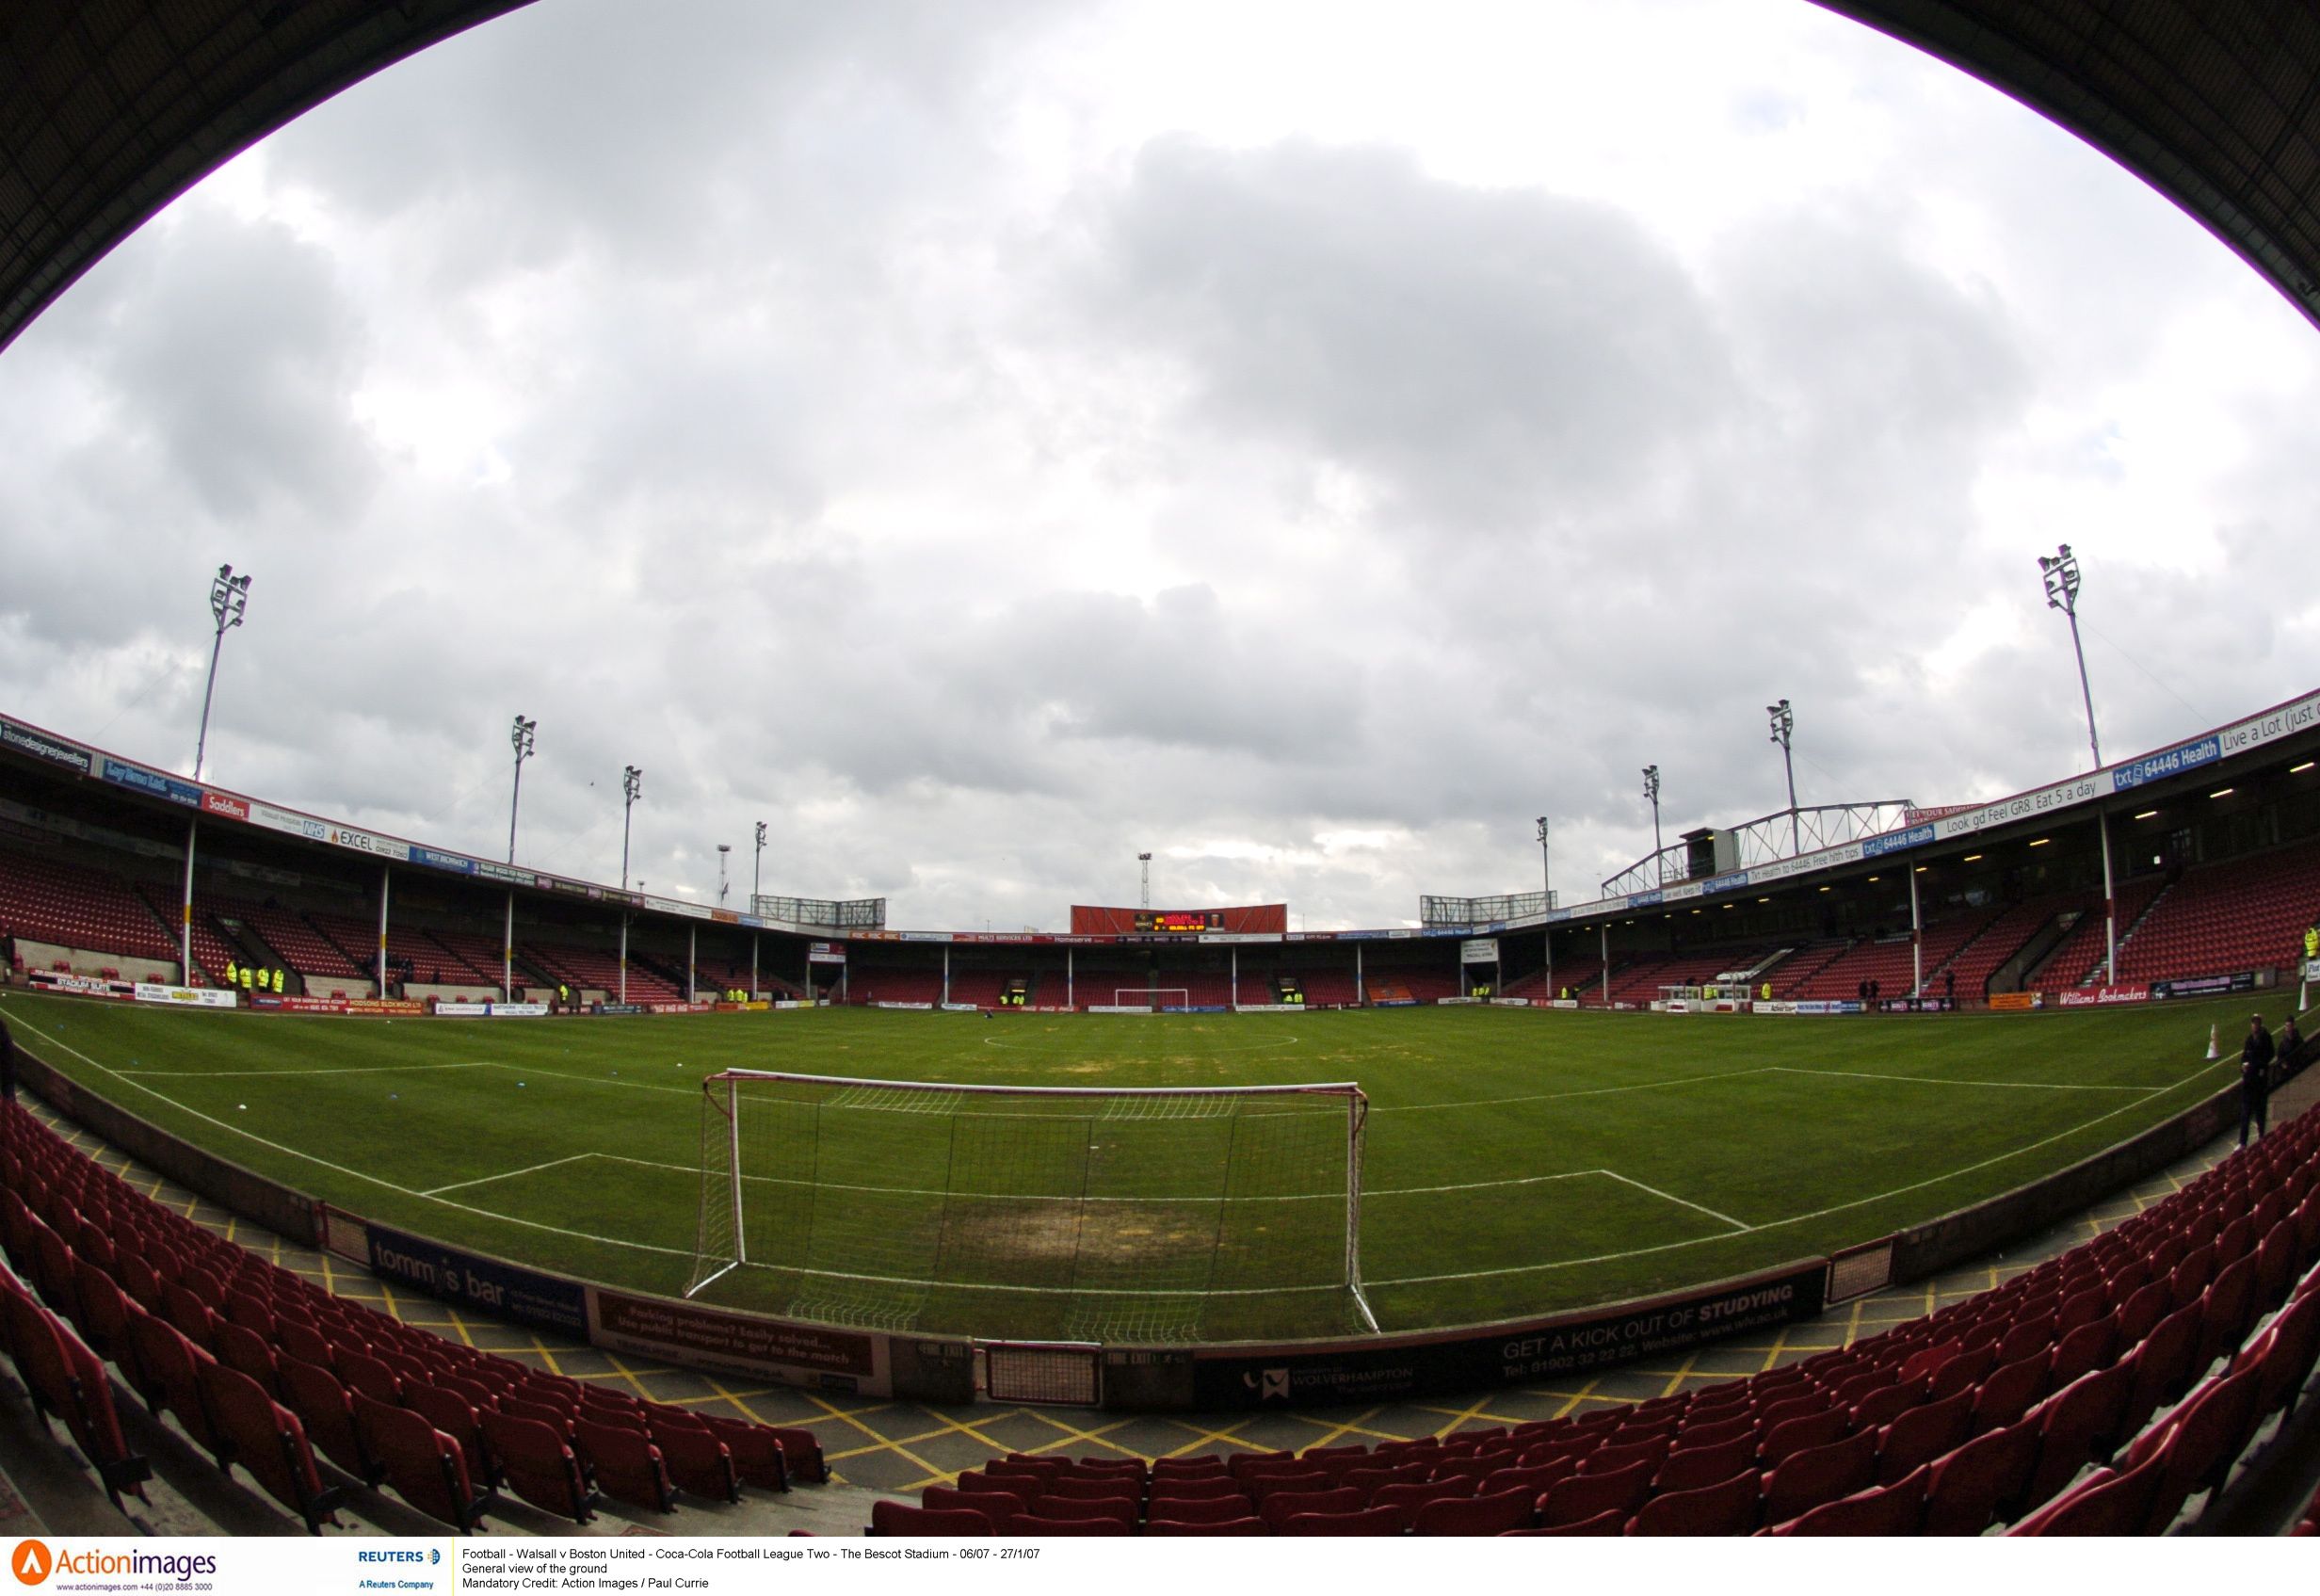 Football - Walsall v Boston United - Coca-Cola Football League Two - The Bescot Stadium - 06/07 - 27/1/07 
General view of the ground 
Mandatory Credit: Action Images / Paul Currie